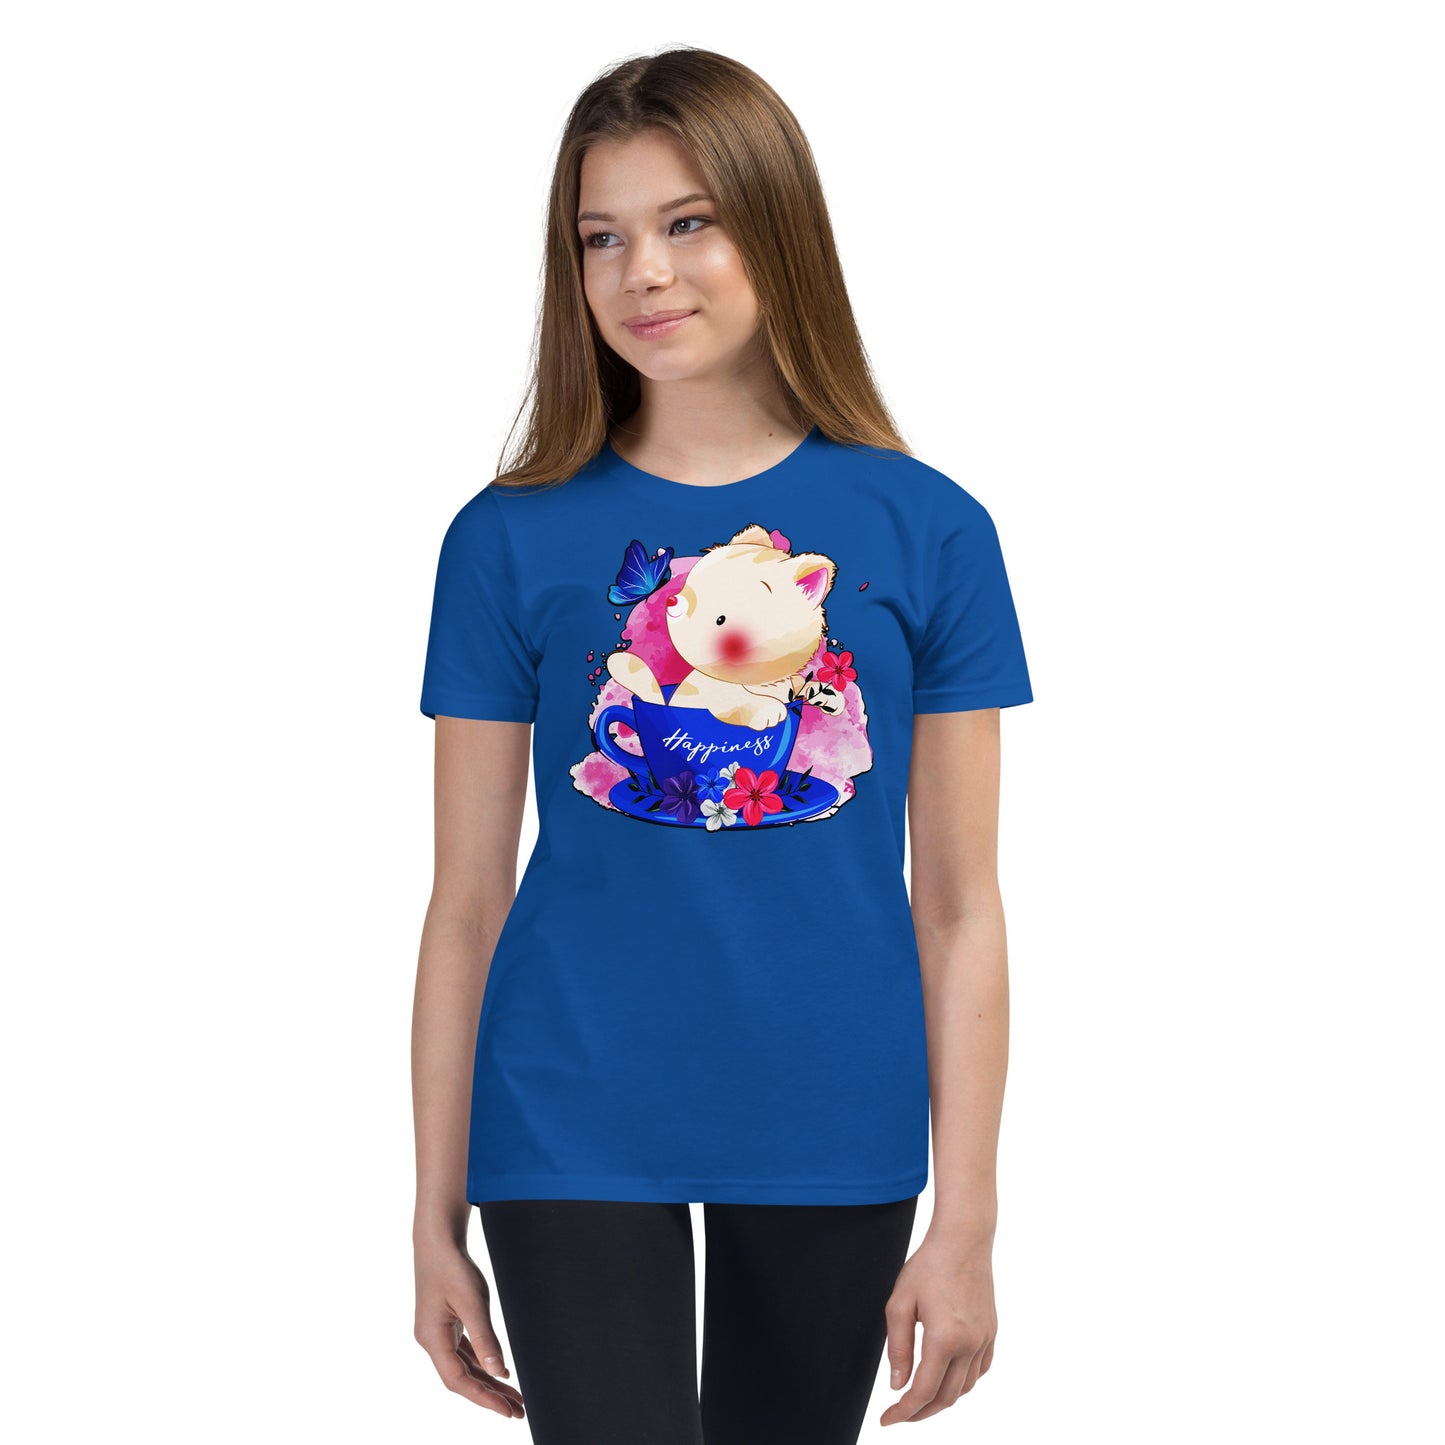 Cute Kitty Cat Playing with Butterfly T-shirt, No. 0321